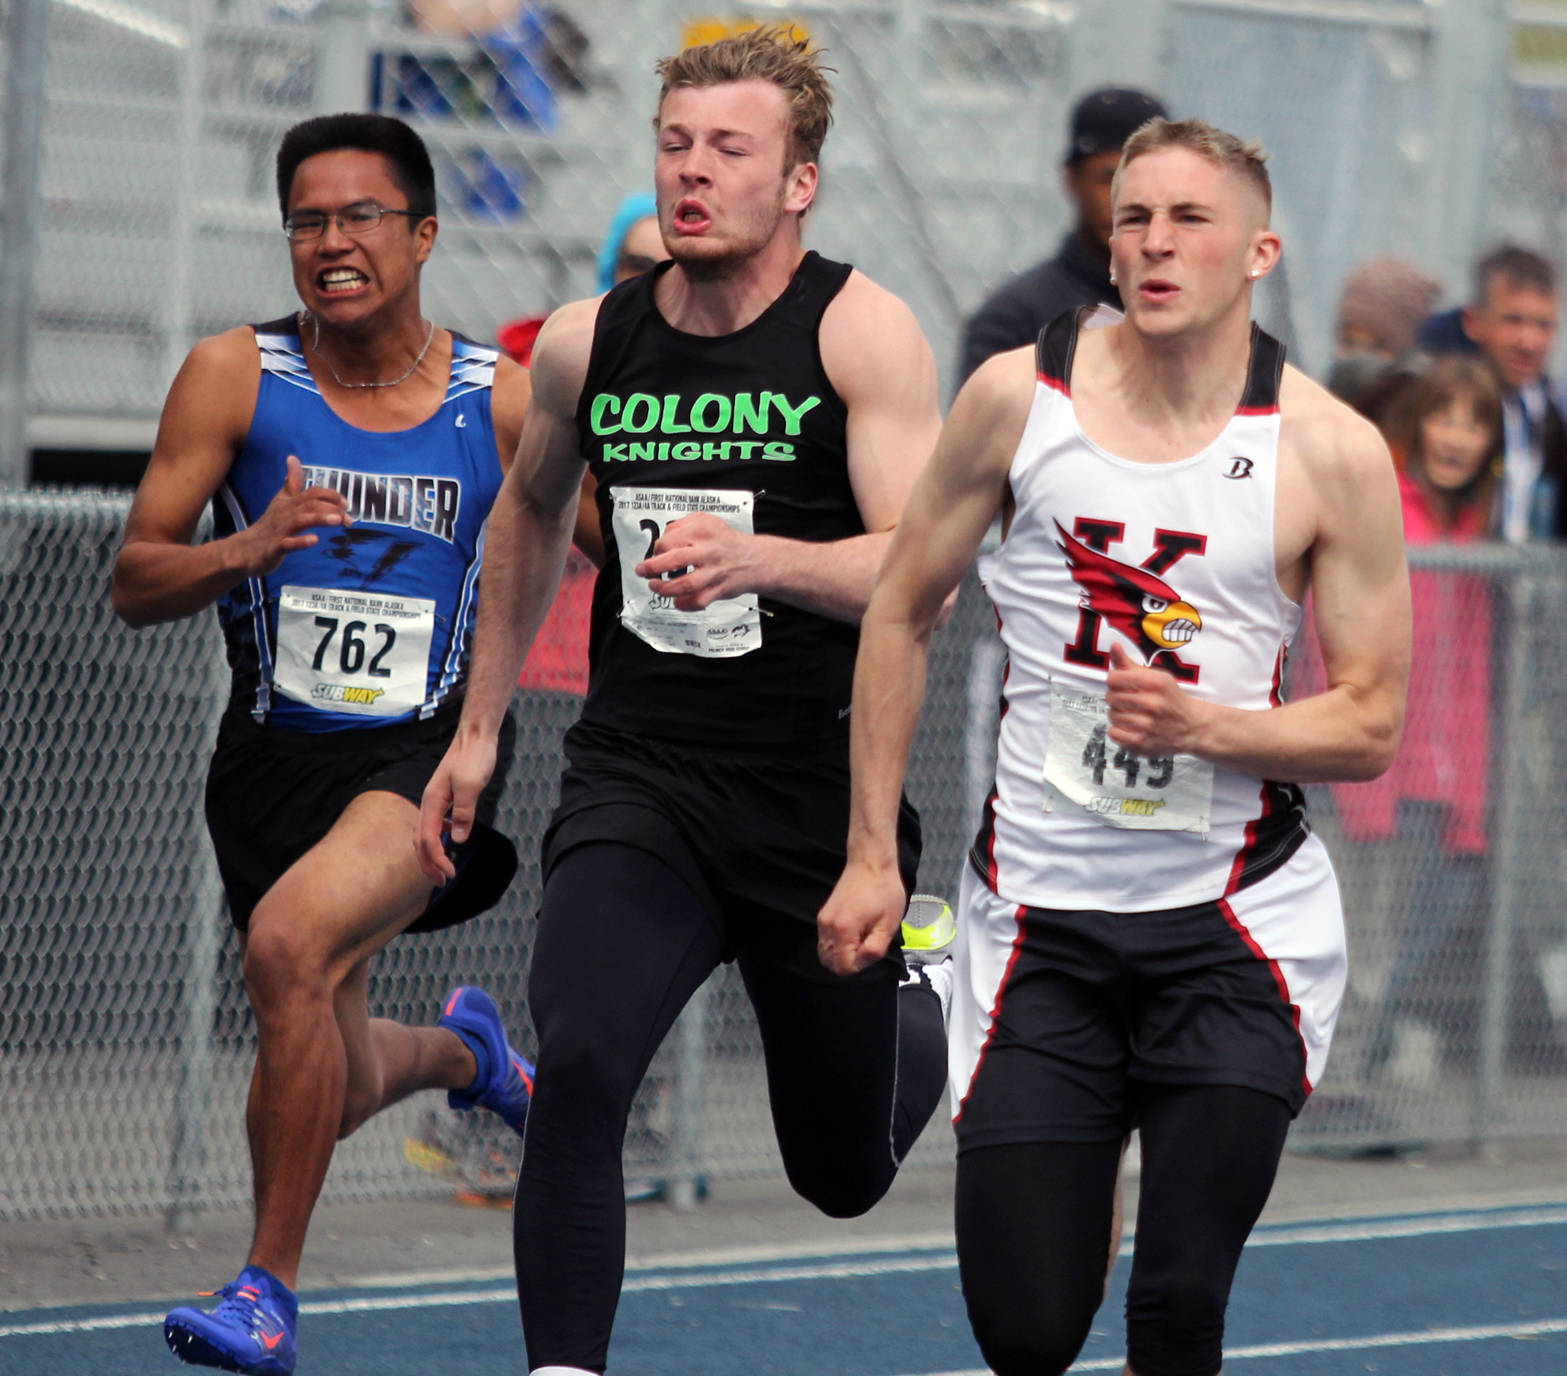 Kenai Central’s Josh Jackman, right, stays just ahead of Colony’s Jon Pomrenke during the boys’ 100 meters preliminaries on the first day of the ASAA/First National Bank State Track and Field Championships Friday at Palmer High School. (Photo by Jeremiah Bartz/Frontiersman.com)